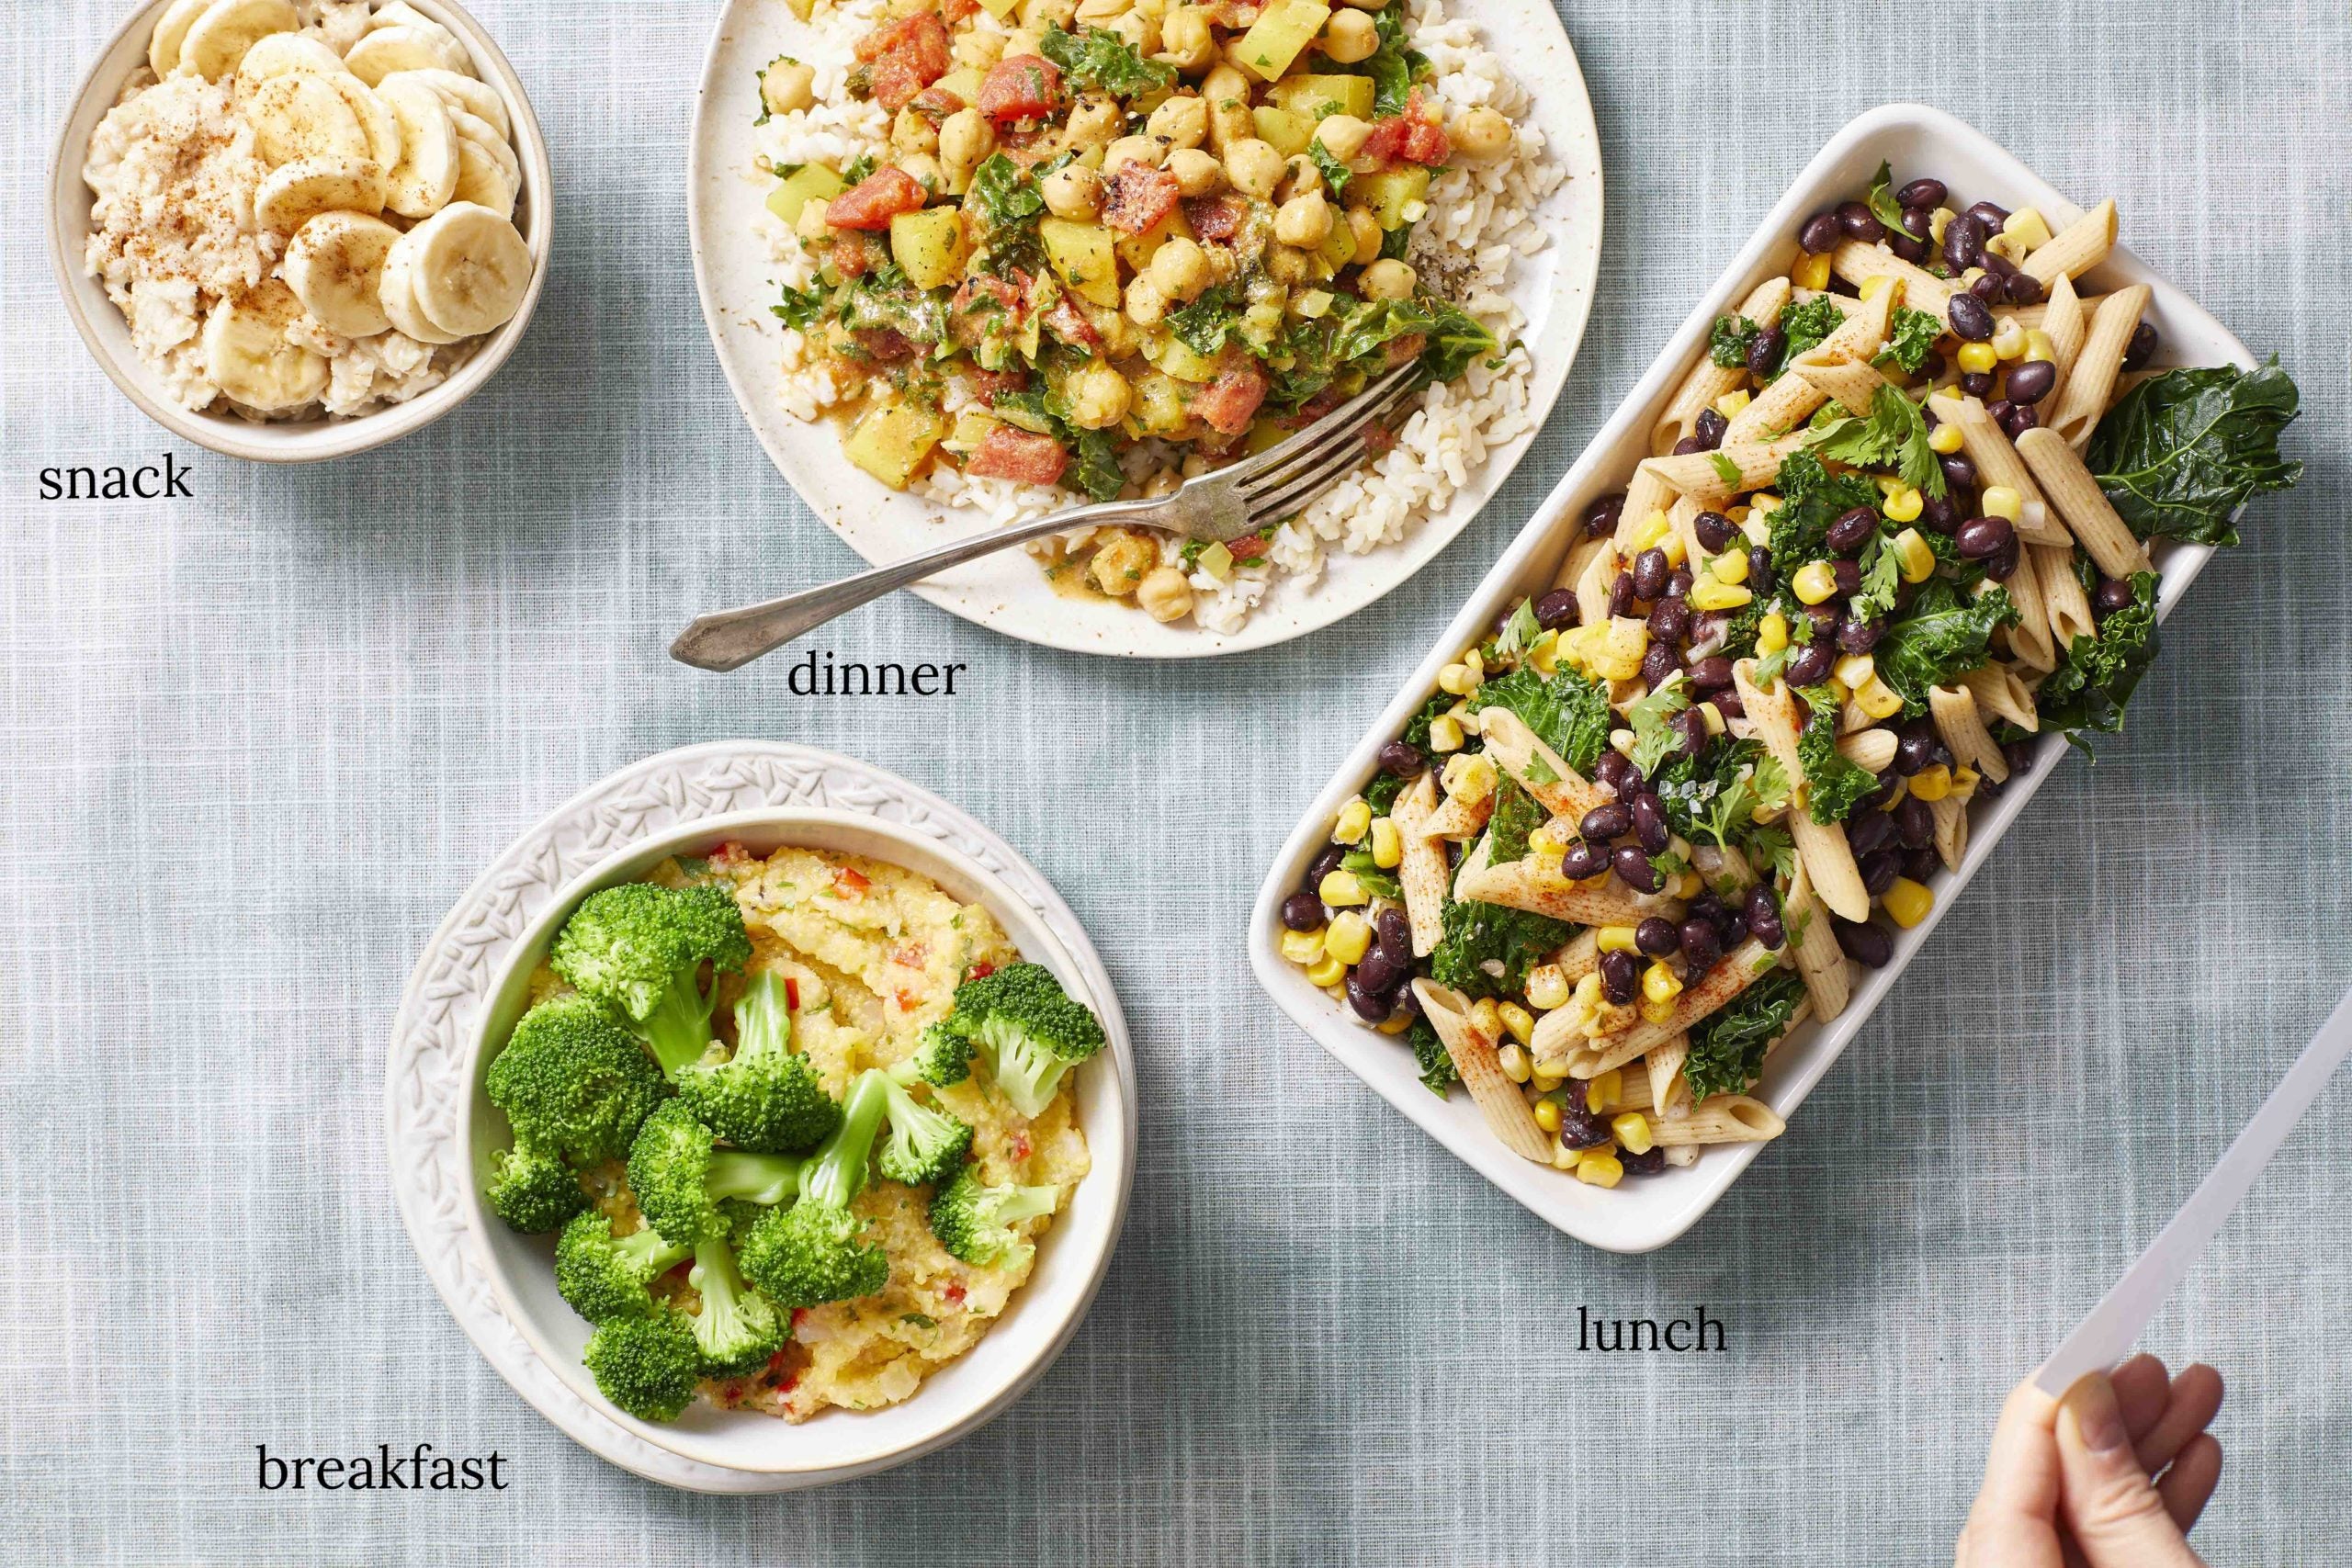 Day 5 of weekly vegan meal plan - banana oatmeal in a bowl next to a bowl of chickpea curry kale stew and a rectangular dish of Tex-Mex pasta salad. At the bottom, a bowl of polenta and broccoli 